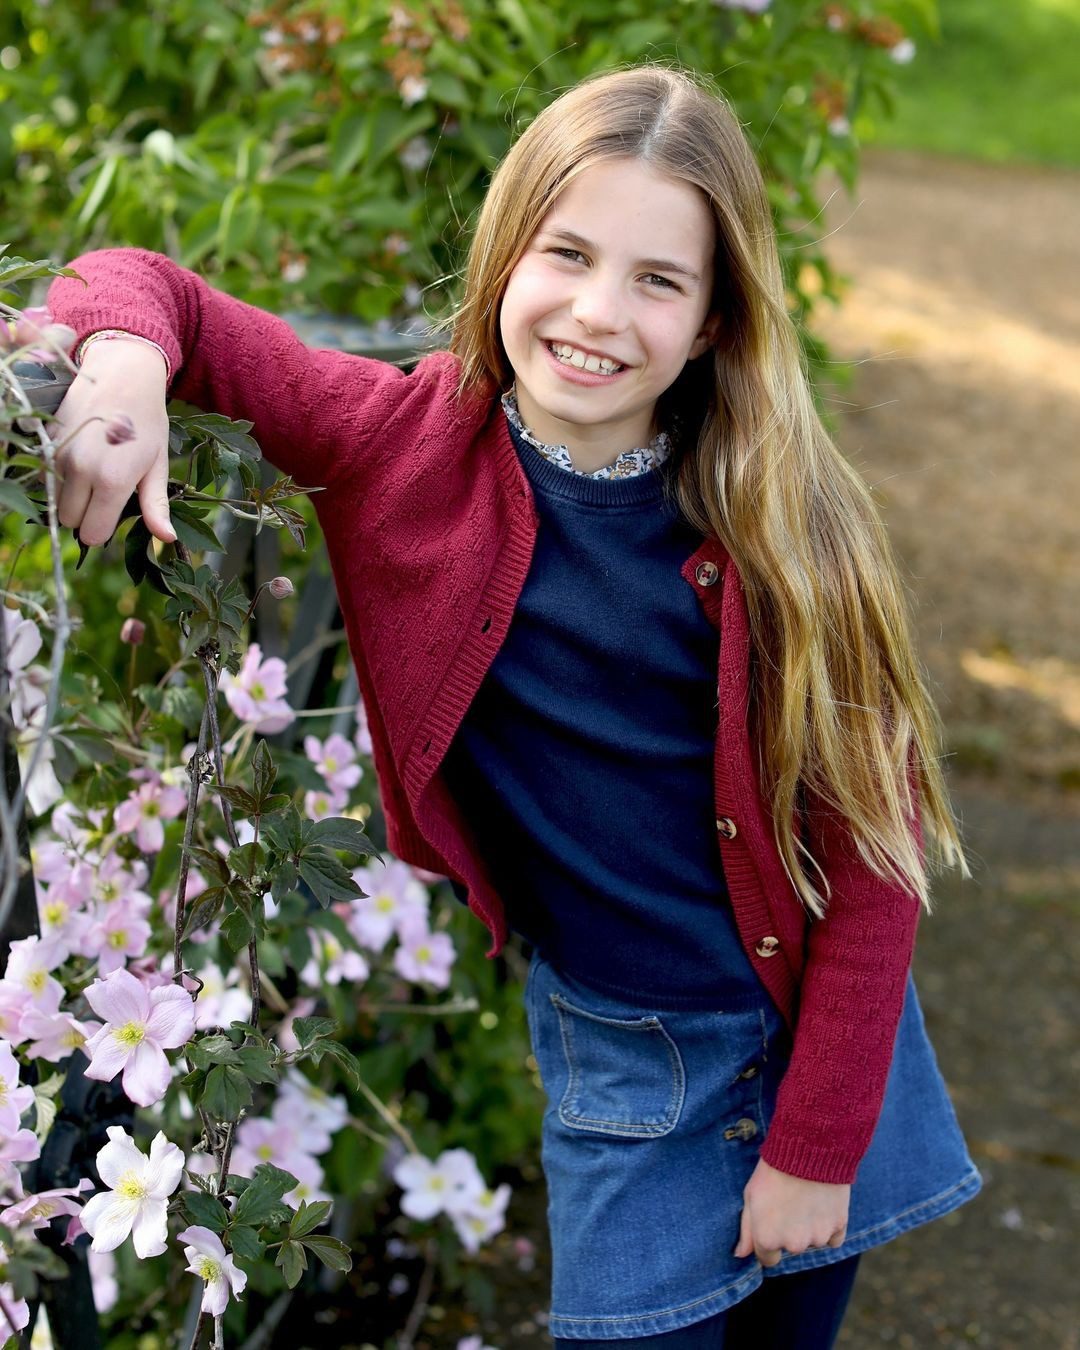 new picture of princess charlotte released on her ninth birthday